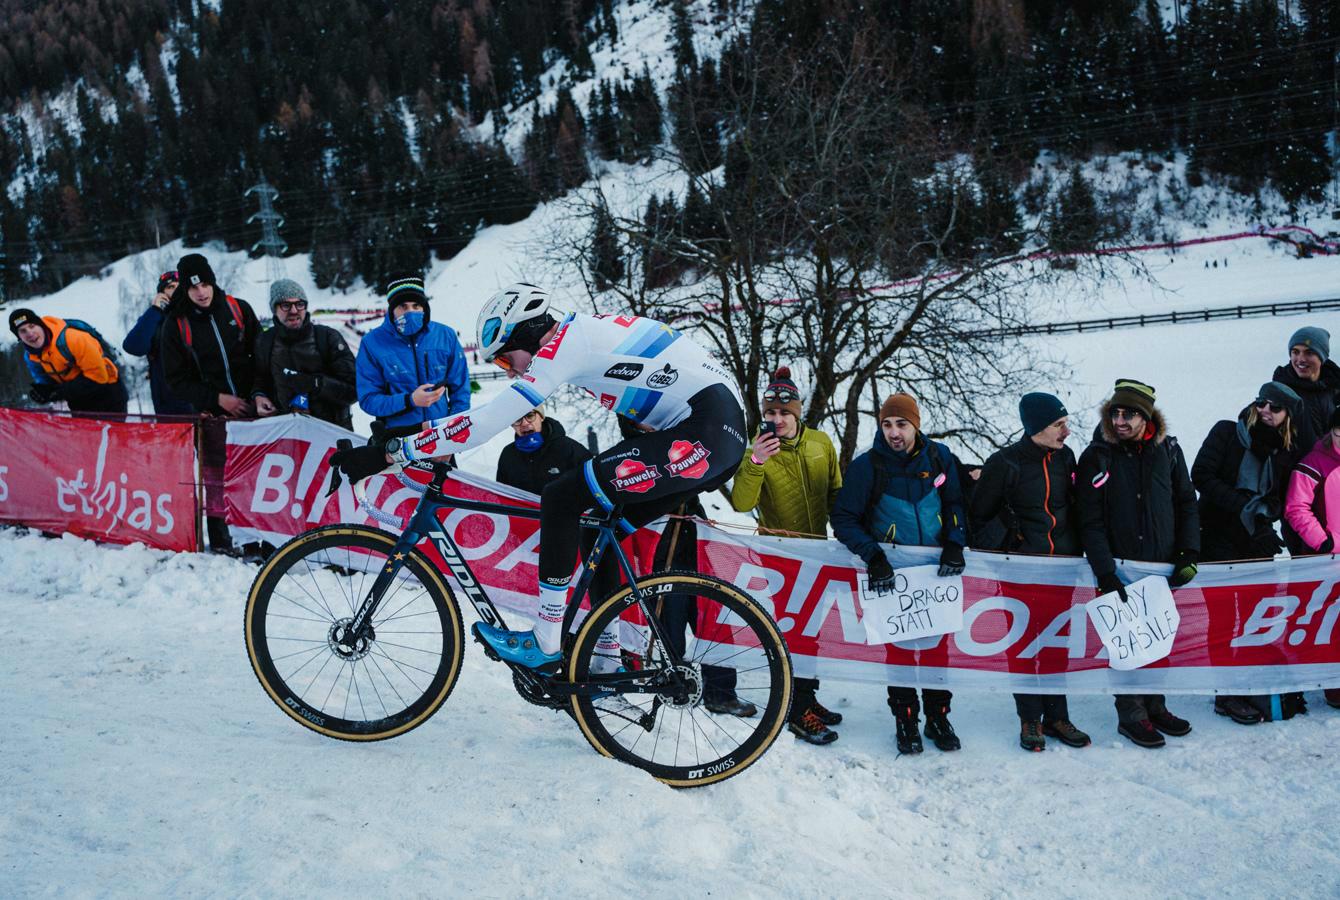 European champion Vanthourenhout crowns himself snow king of Val di Sole